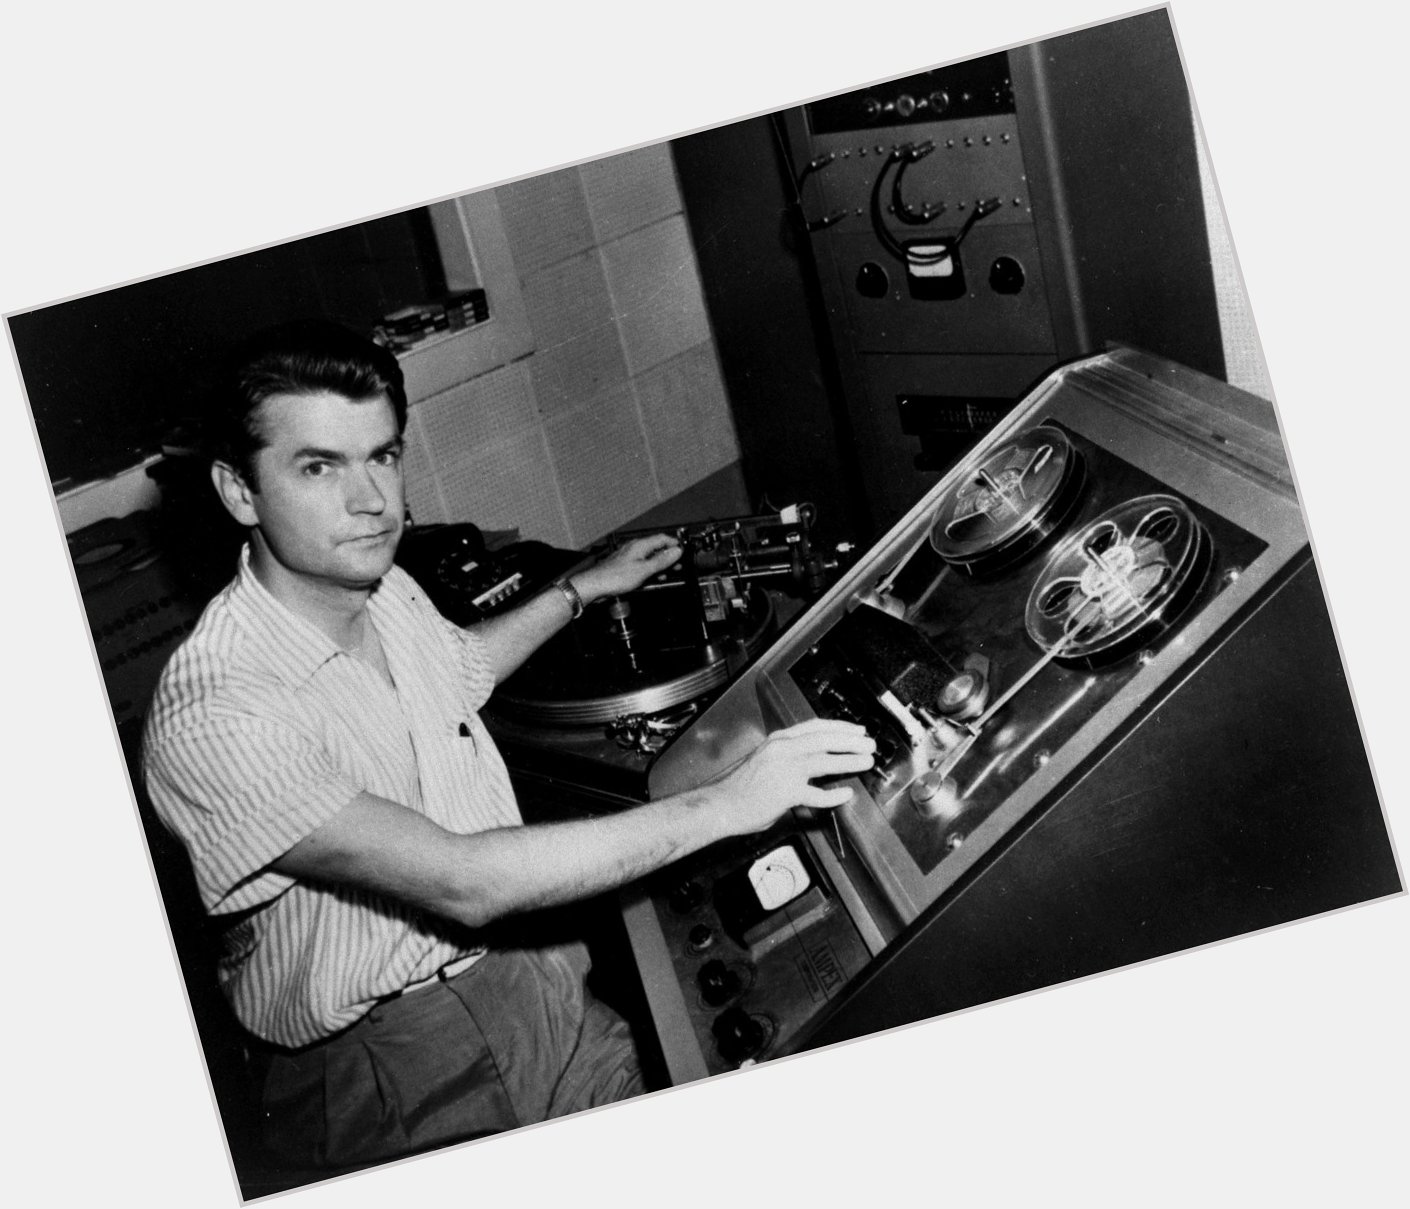 Happy Birthday to Sam Phillips, who would have turned 95 today! 